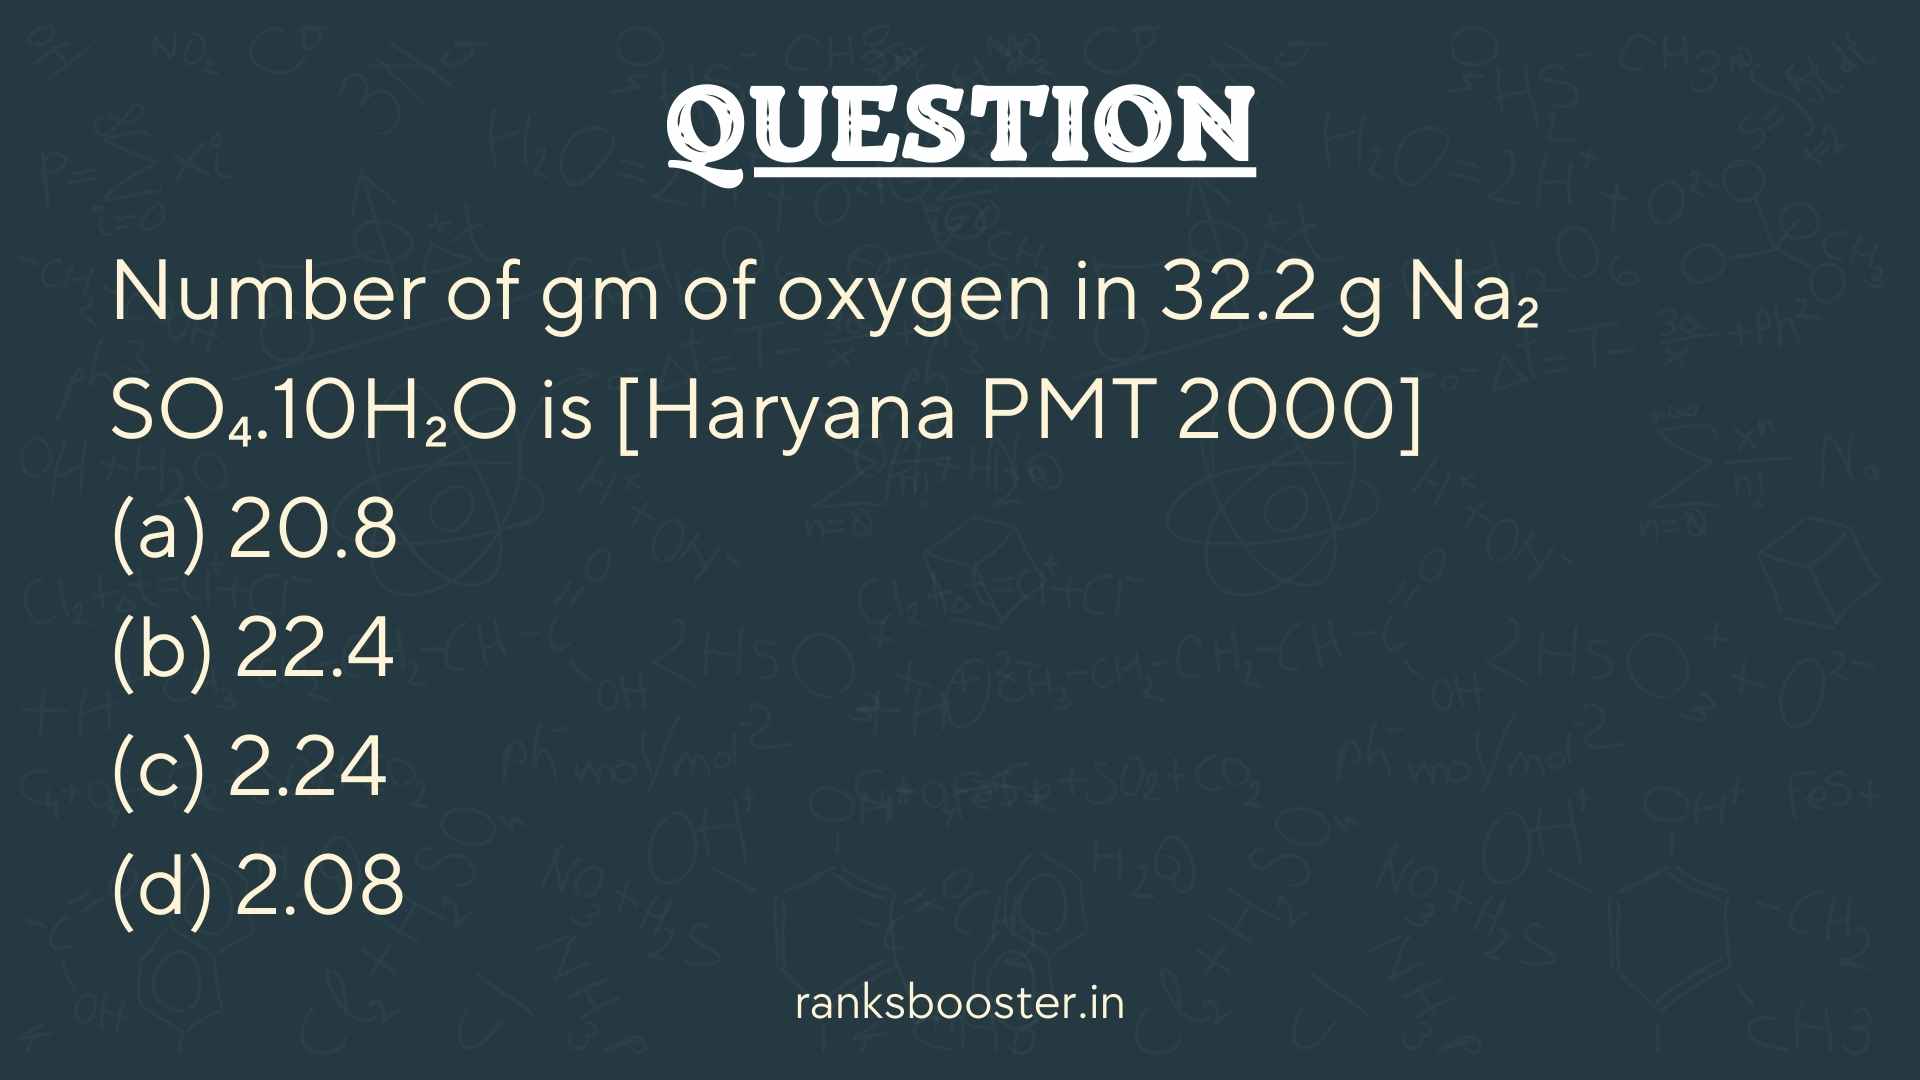 Number of gm of oxygen in 32.2 g Na₂ SO₄.10H₂O is [Haryana PMT 2000] (a) 20.8 (b) 22.4 (c) 2.24 (d) 2.08